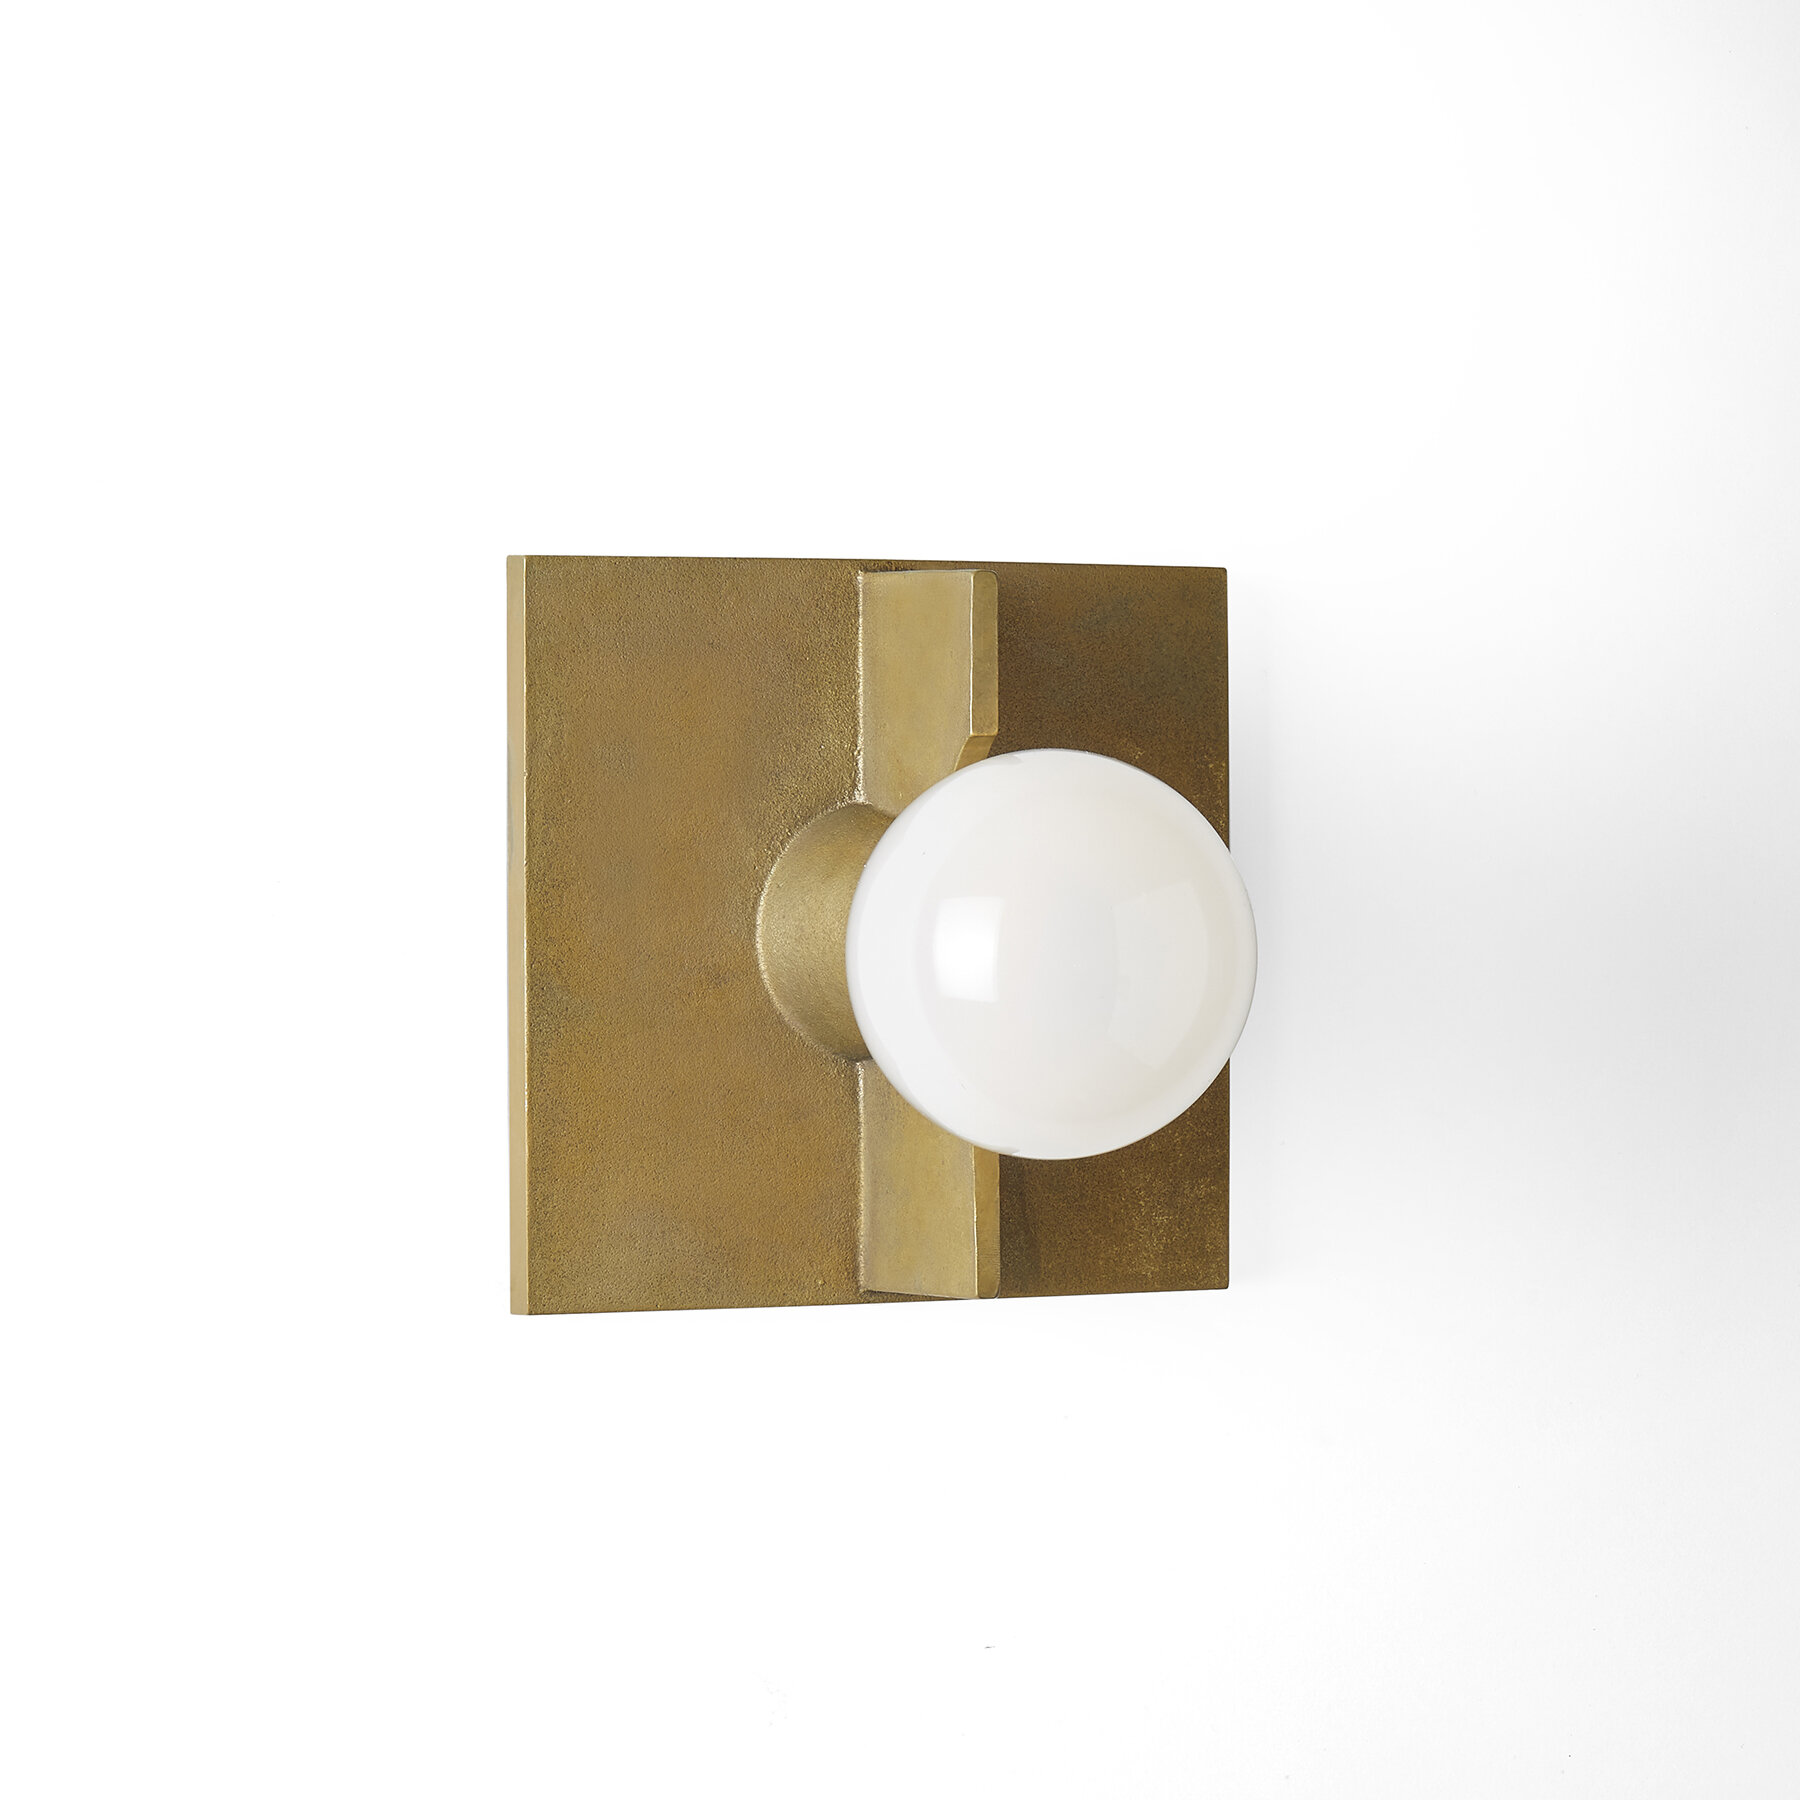 MERIDIAN SCONCE - SQUARE 6.25" - $945